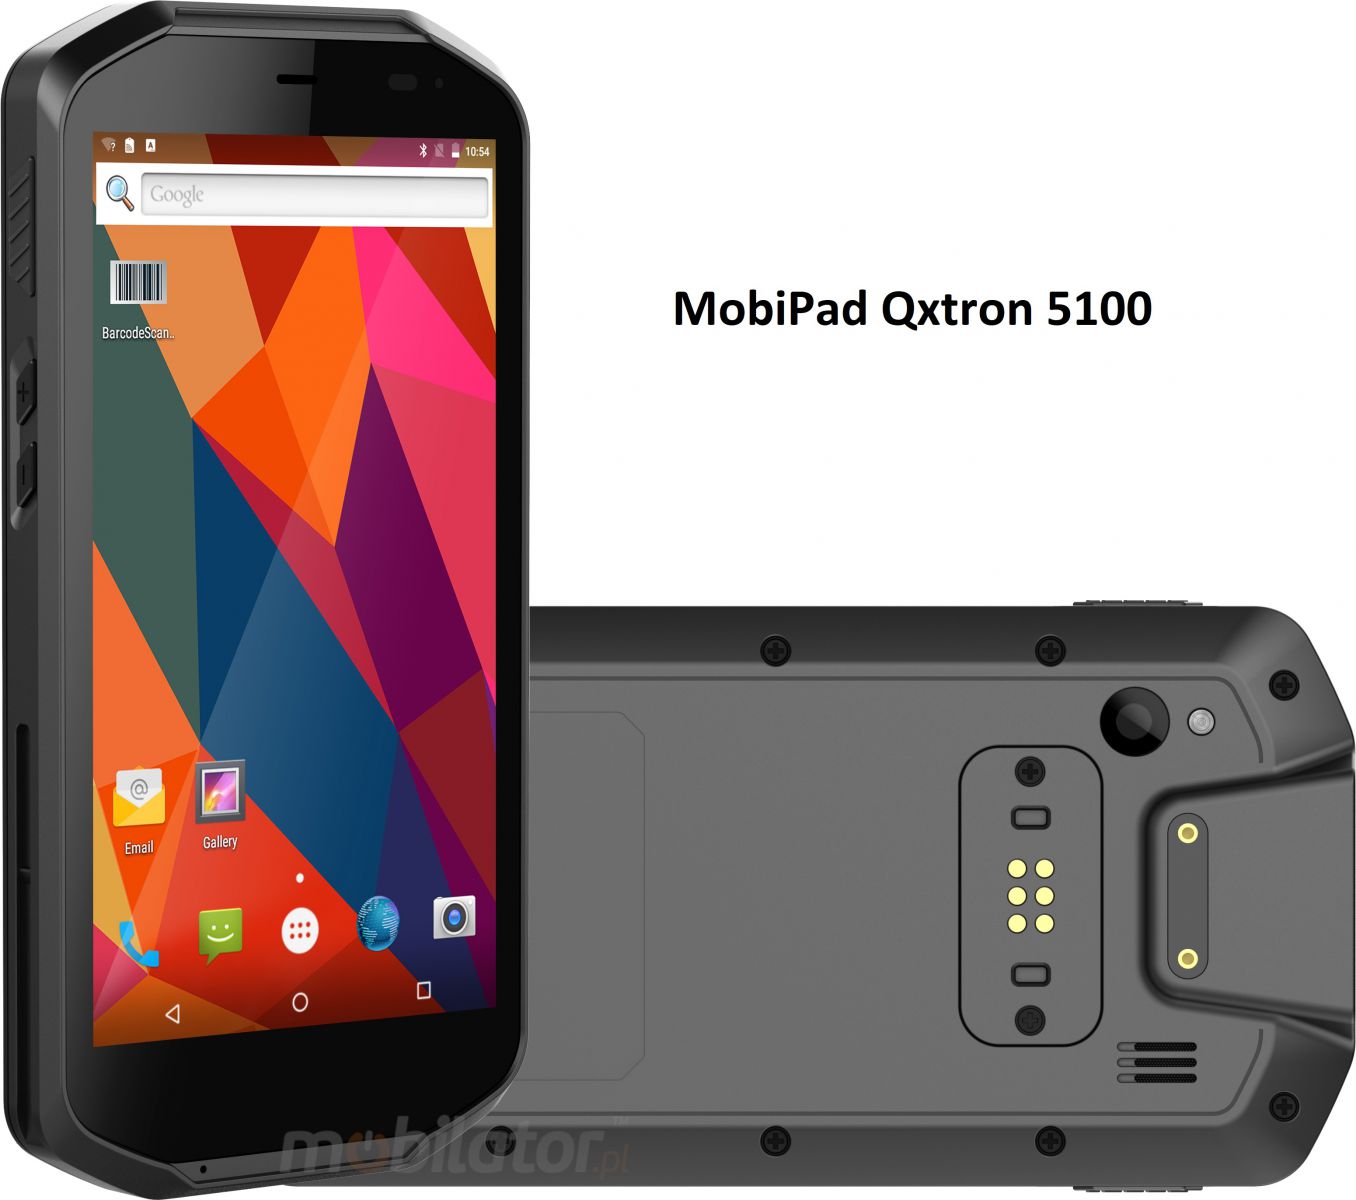 Mobipad Qxtron Q5100 v.6 - reinforced data collector (IP65 + MIL-STD-810G), 5-inch screen, 4GB RAM and 64GB flash, Bluetooth 4.0 and Android 9.0 system, 2D and UHF code scanner.